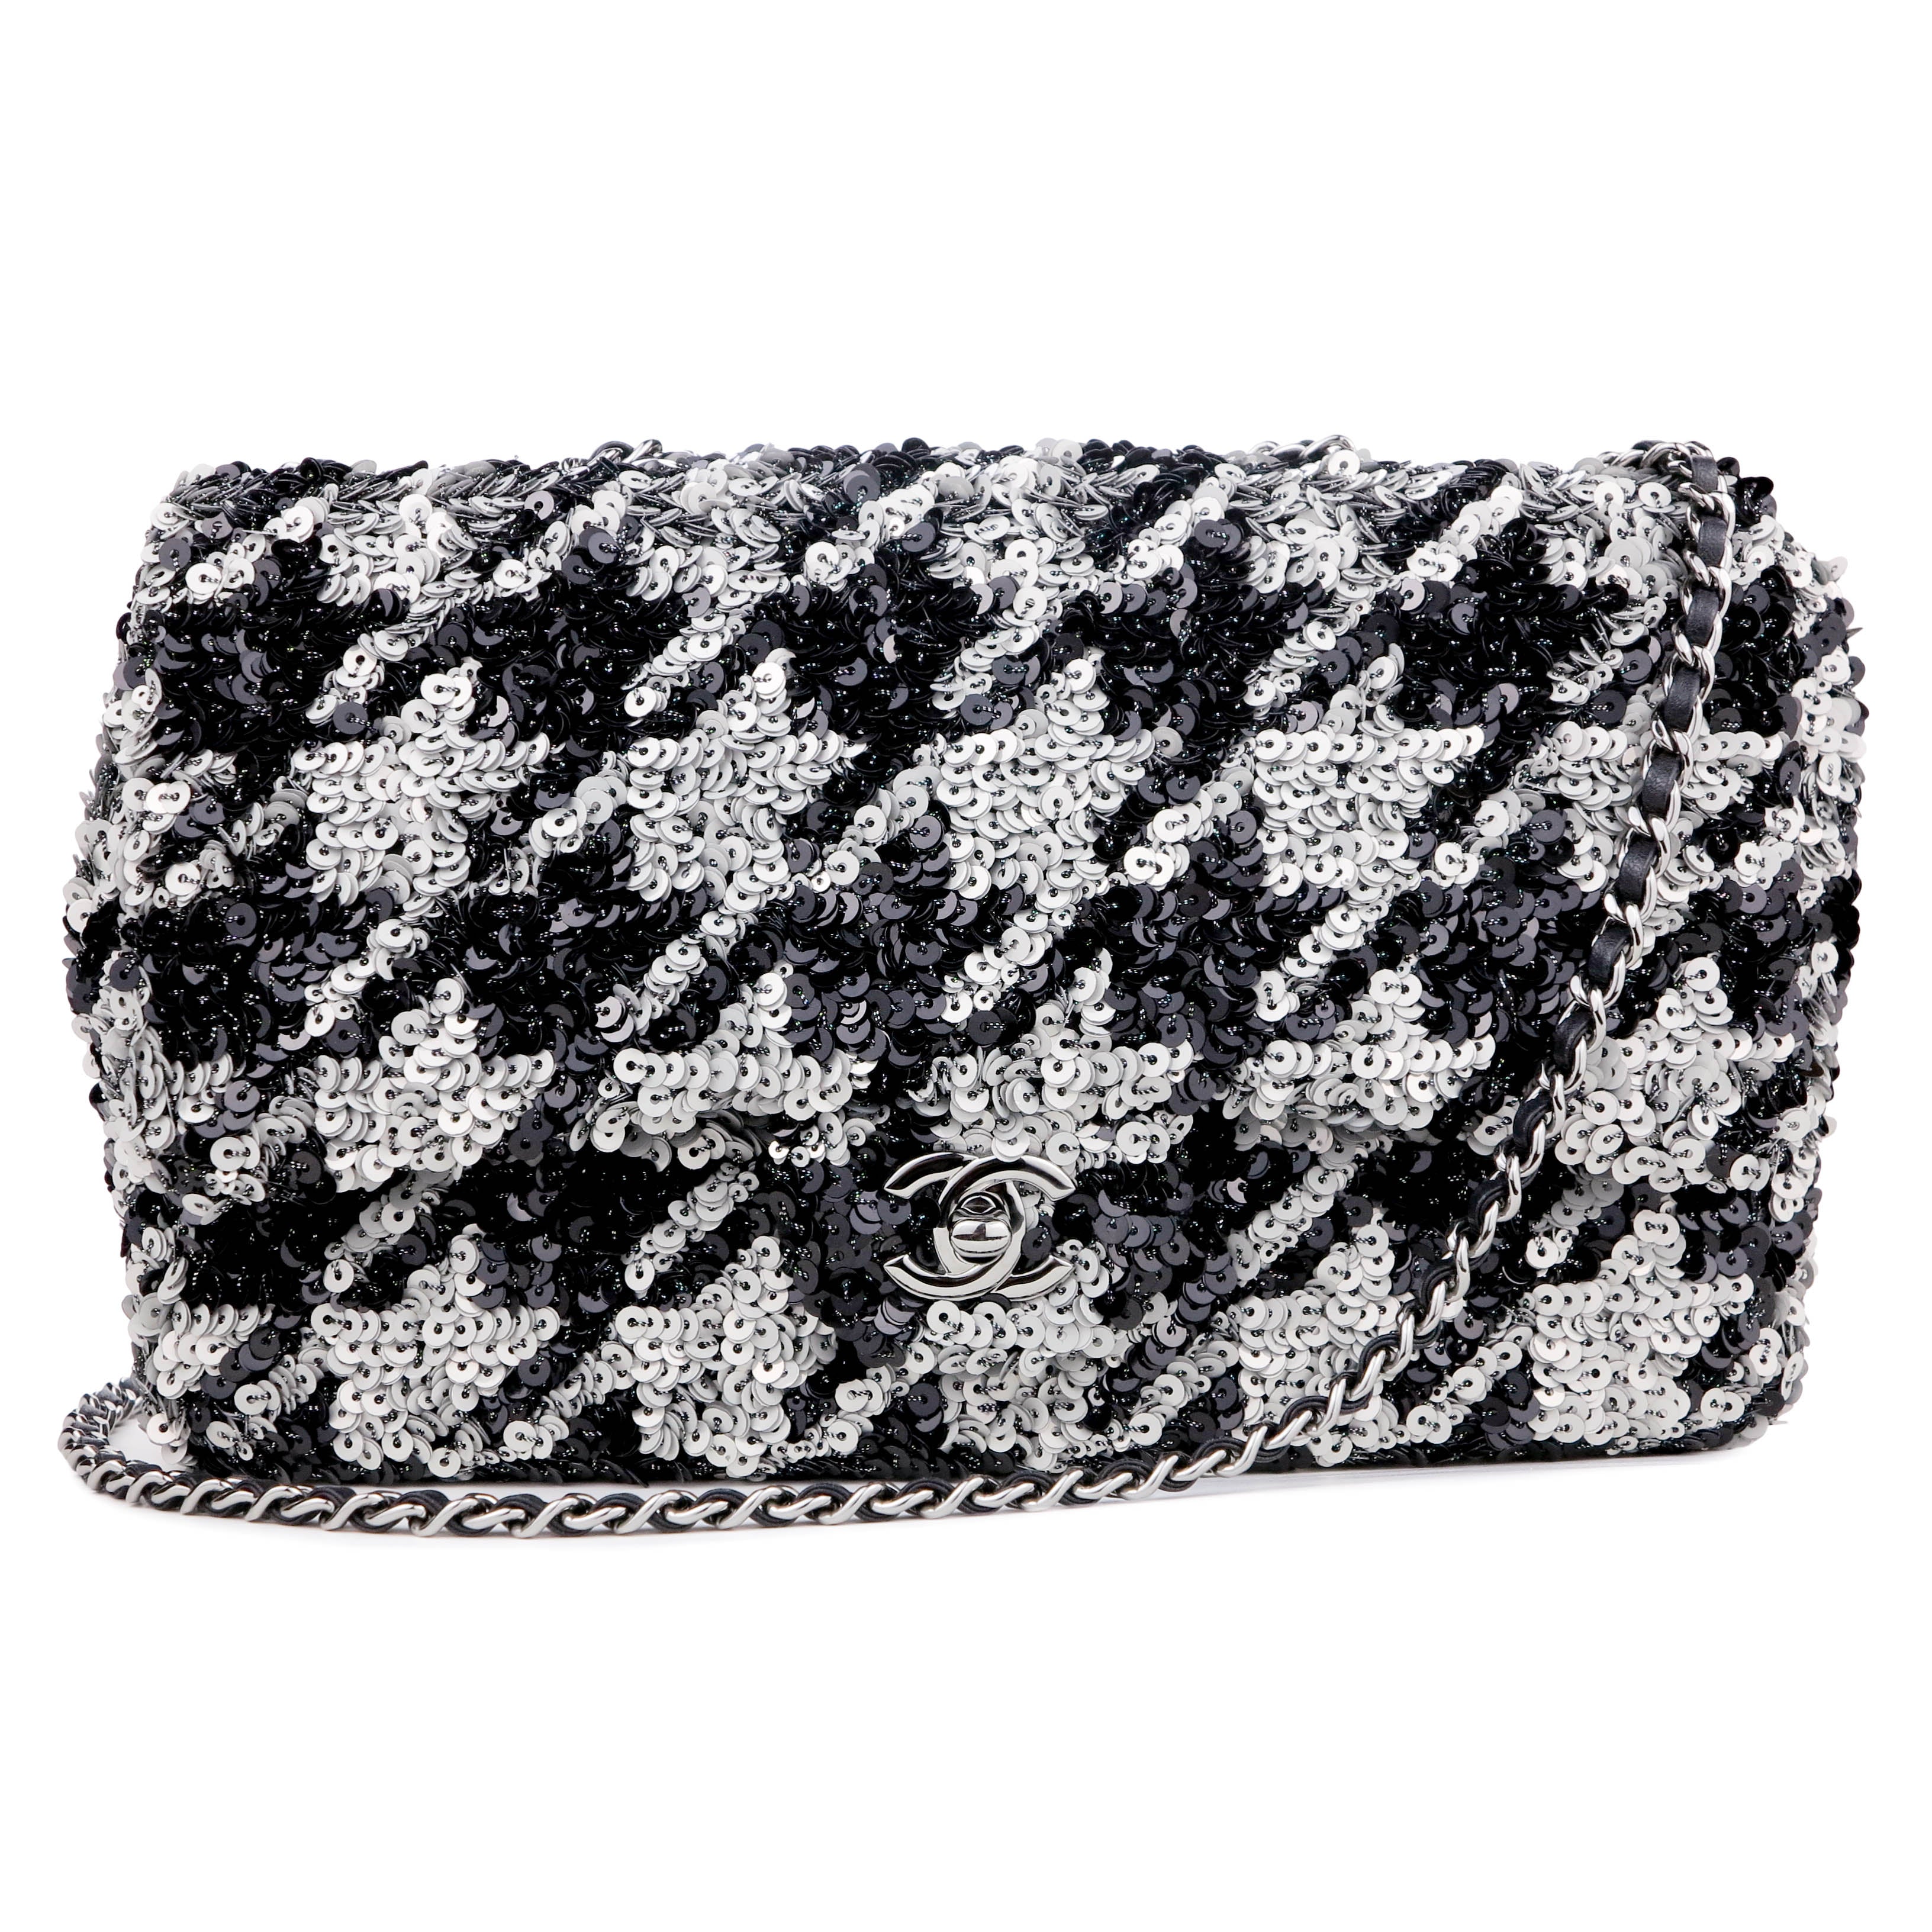 Houndstooth Sequin Medium Flap Bag in Silver and Black